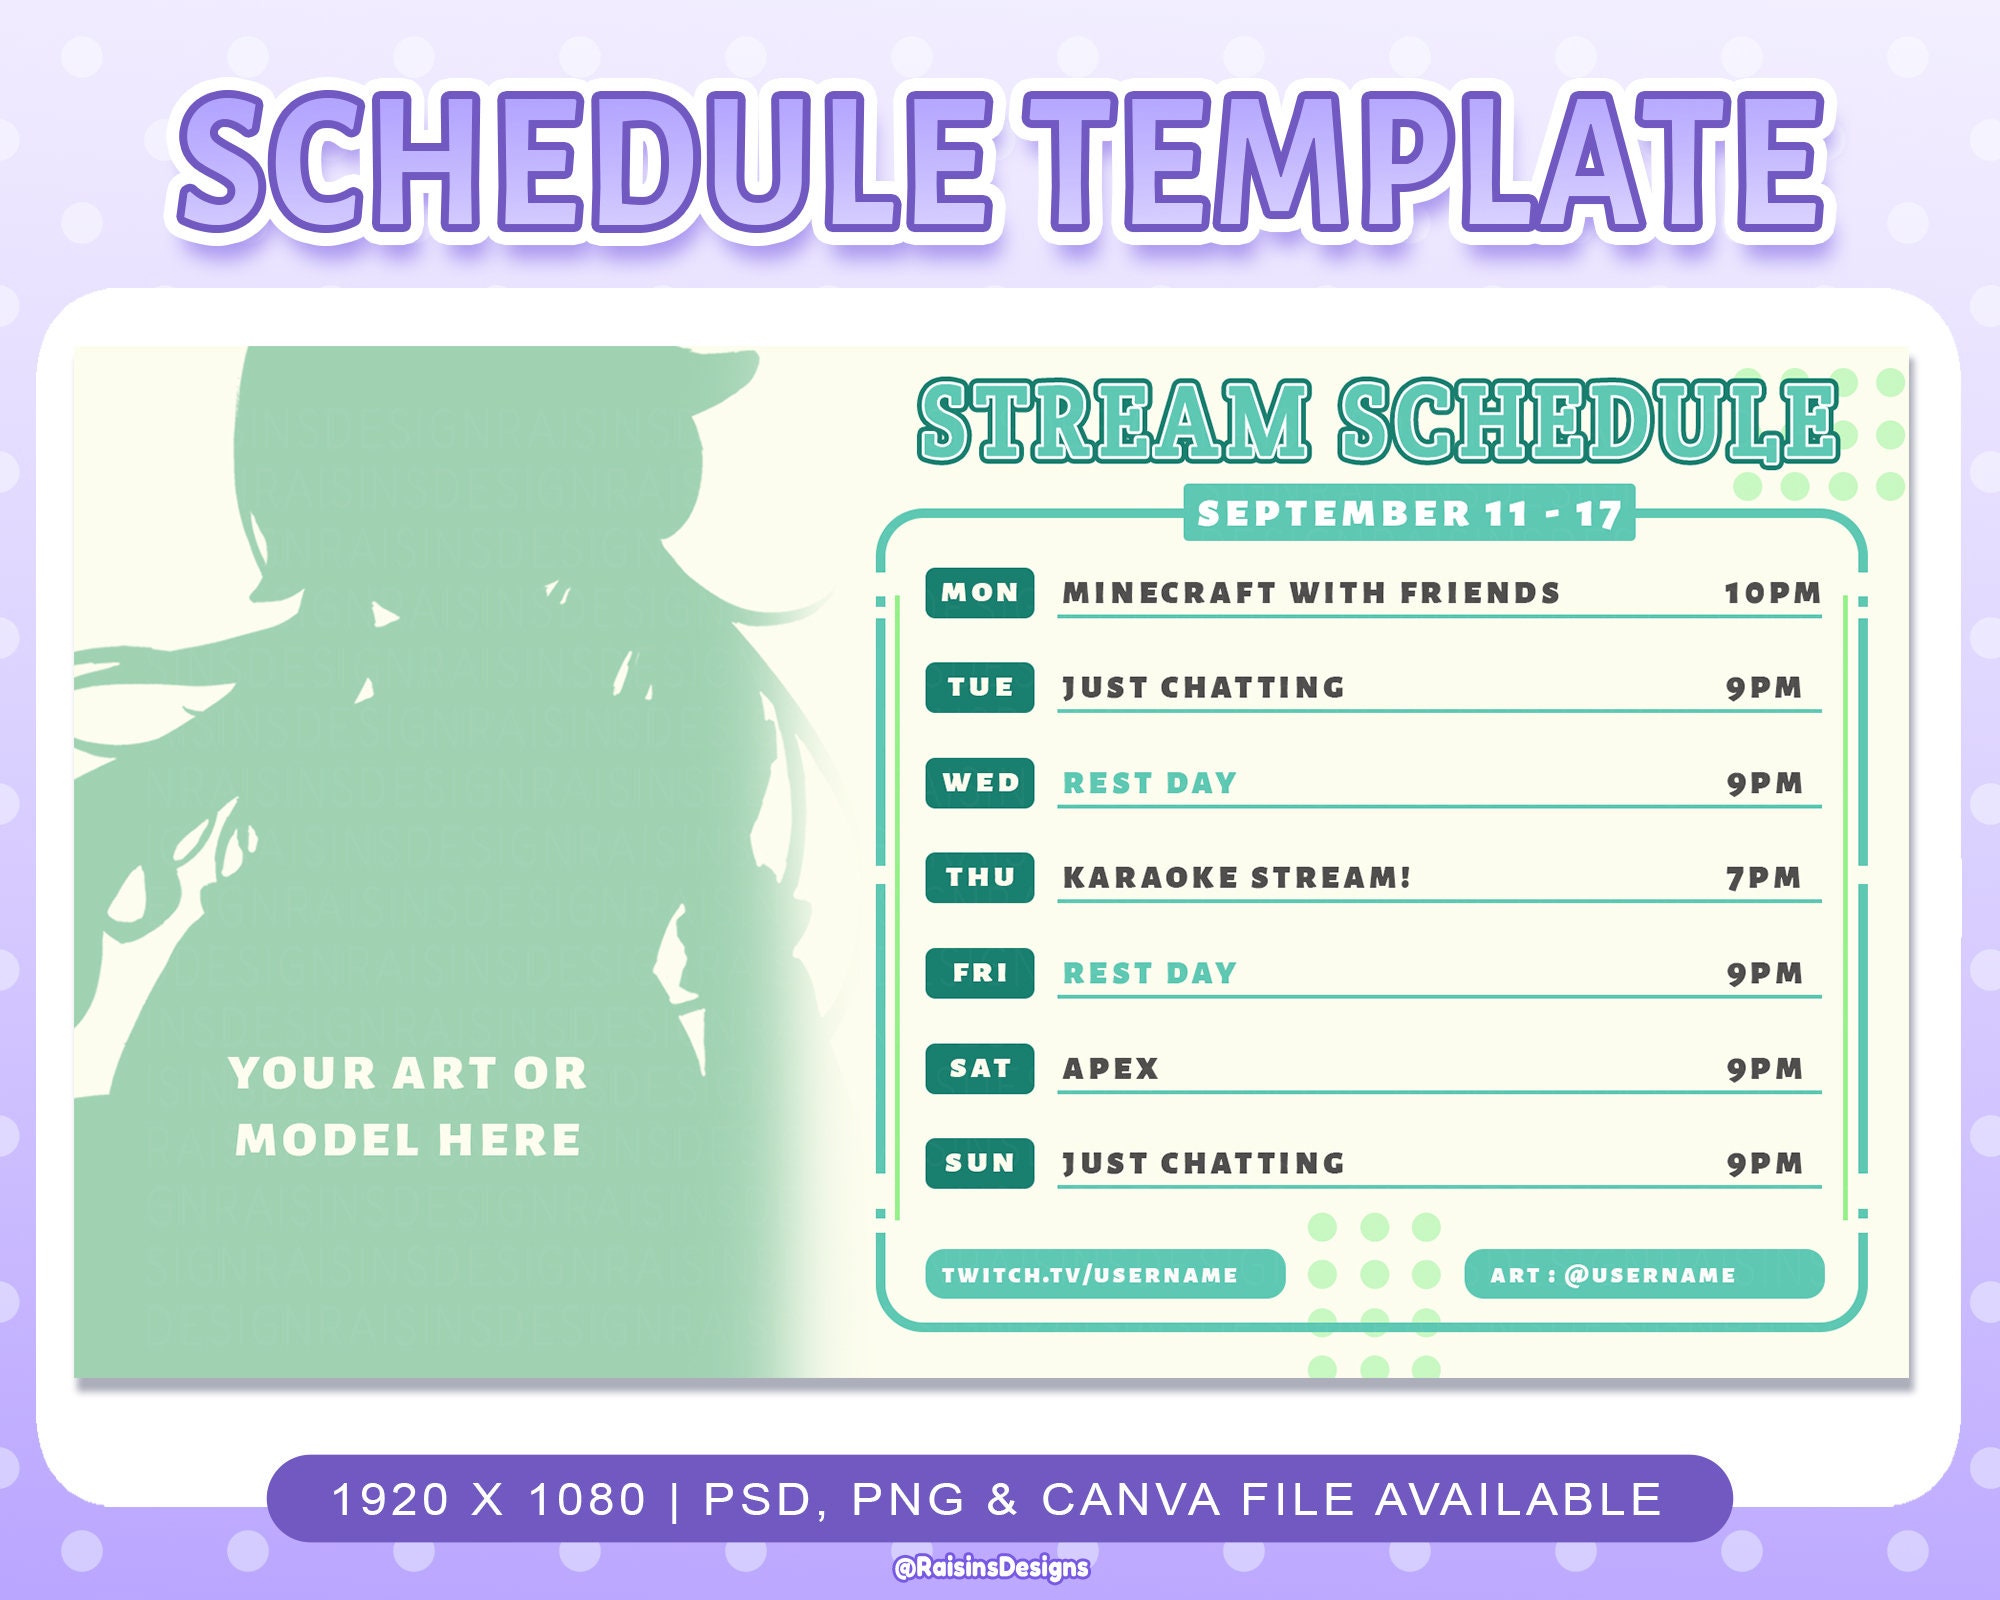 stream-schedule-template-for-twitch-youtube-streaming-etsy